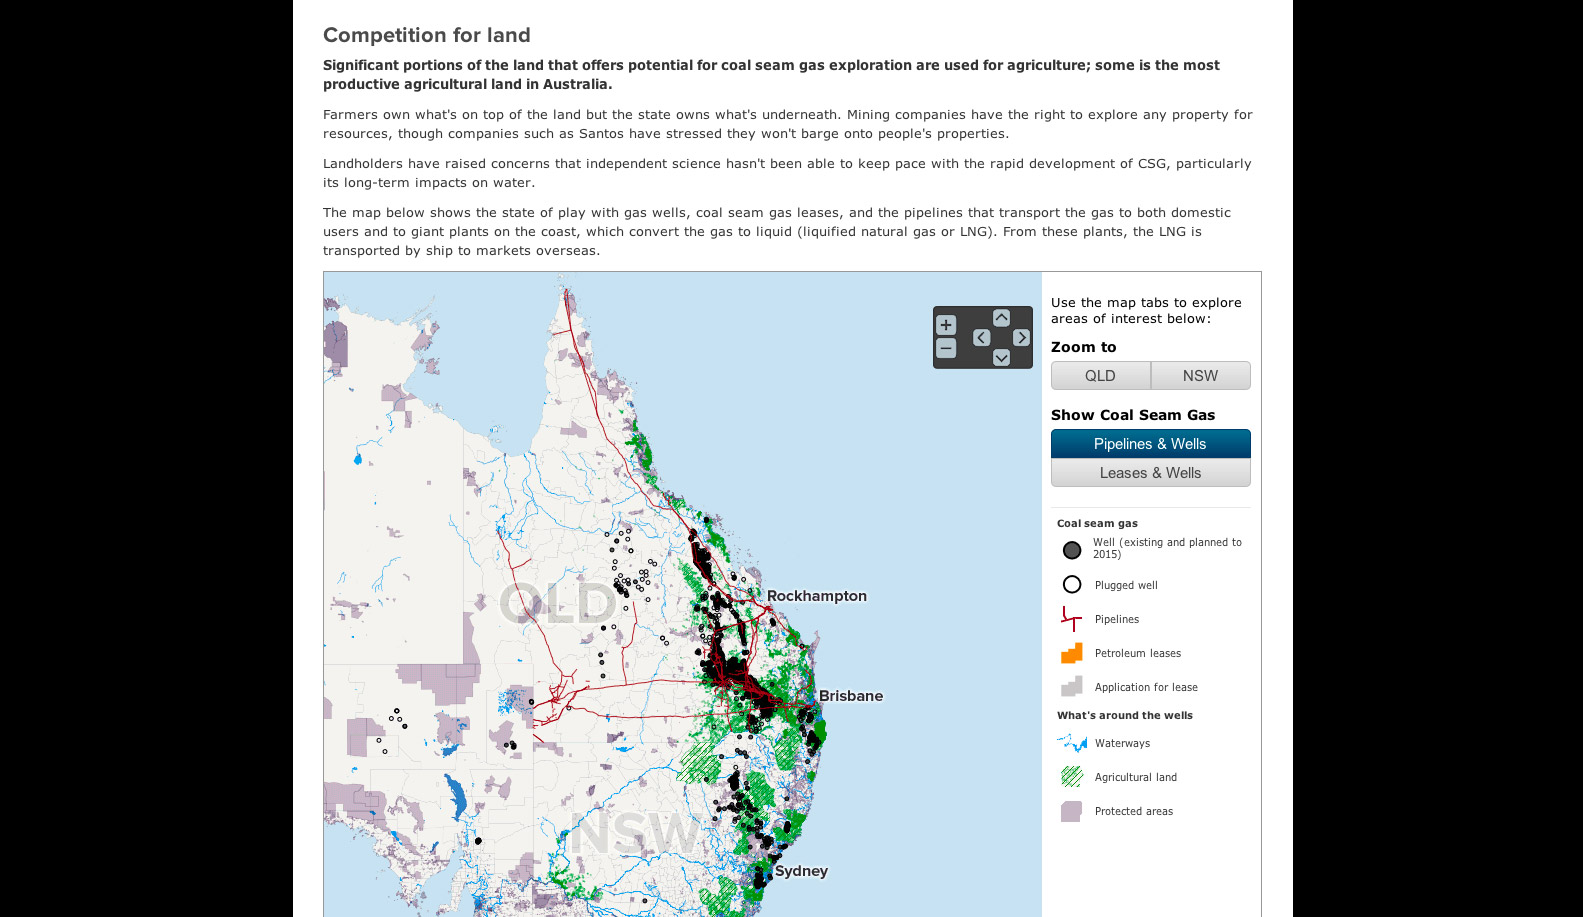 Competition for Land Map The debate about coal seam gas mainly revolves around the issue of land use. One of them is about land and how wells, and general disturbance of land can go on to affect agricultural land, protected areas, and waterways. This map was produced usingTileMill, a very powerful tool for producing custom maps from open standard data formats. Next step, we hope to do some hosted interactive maps.